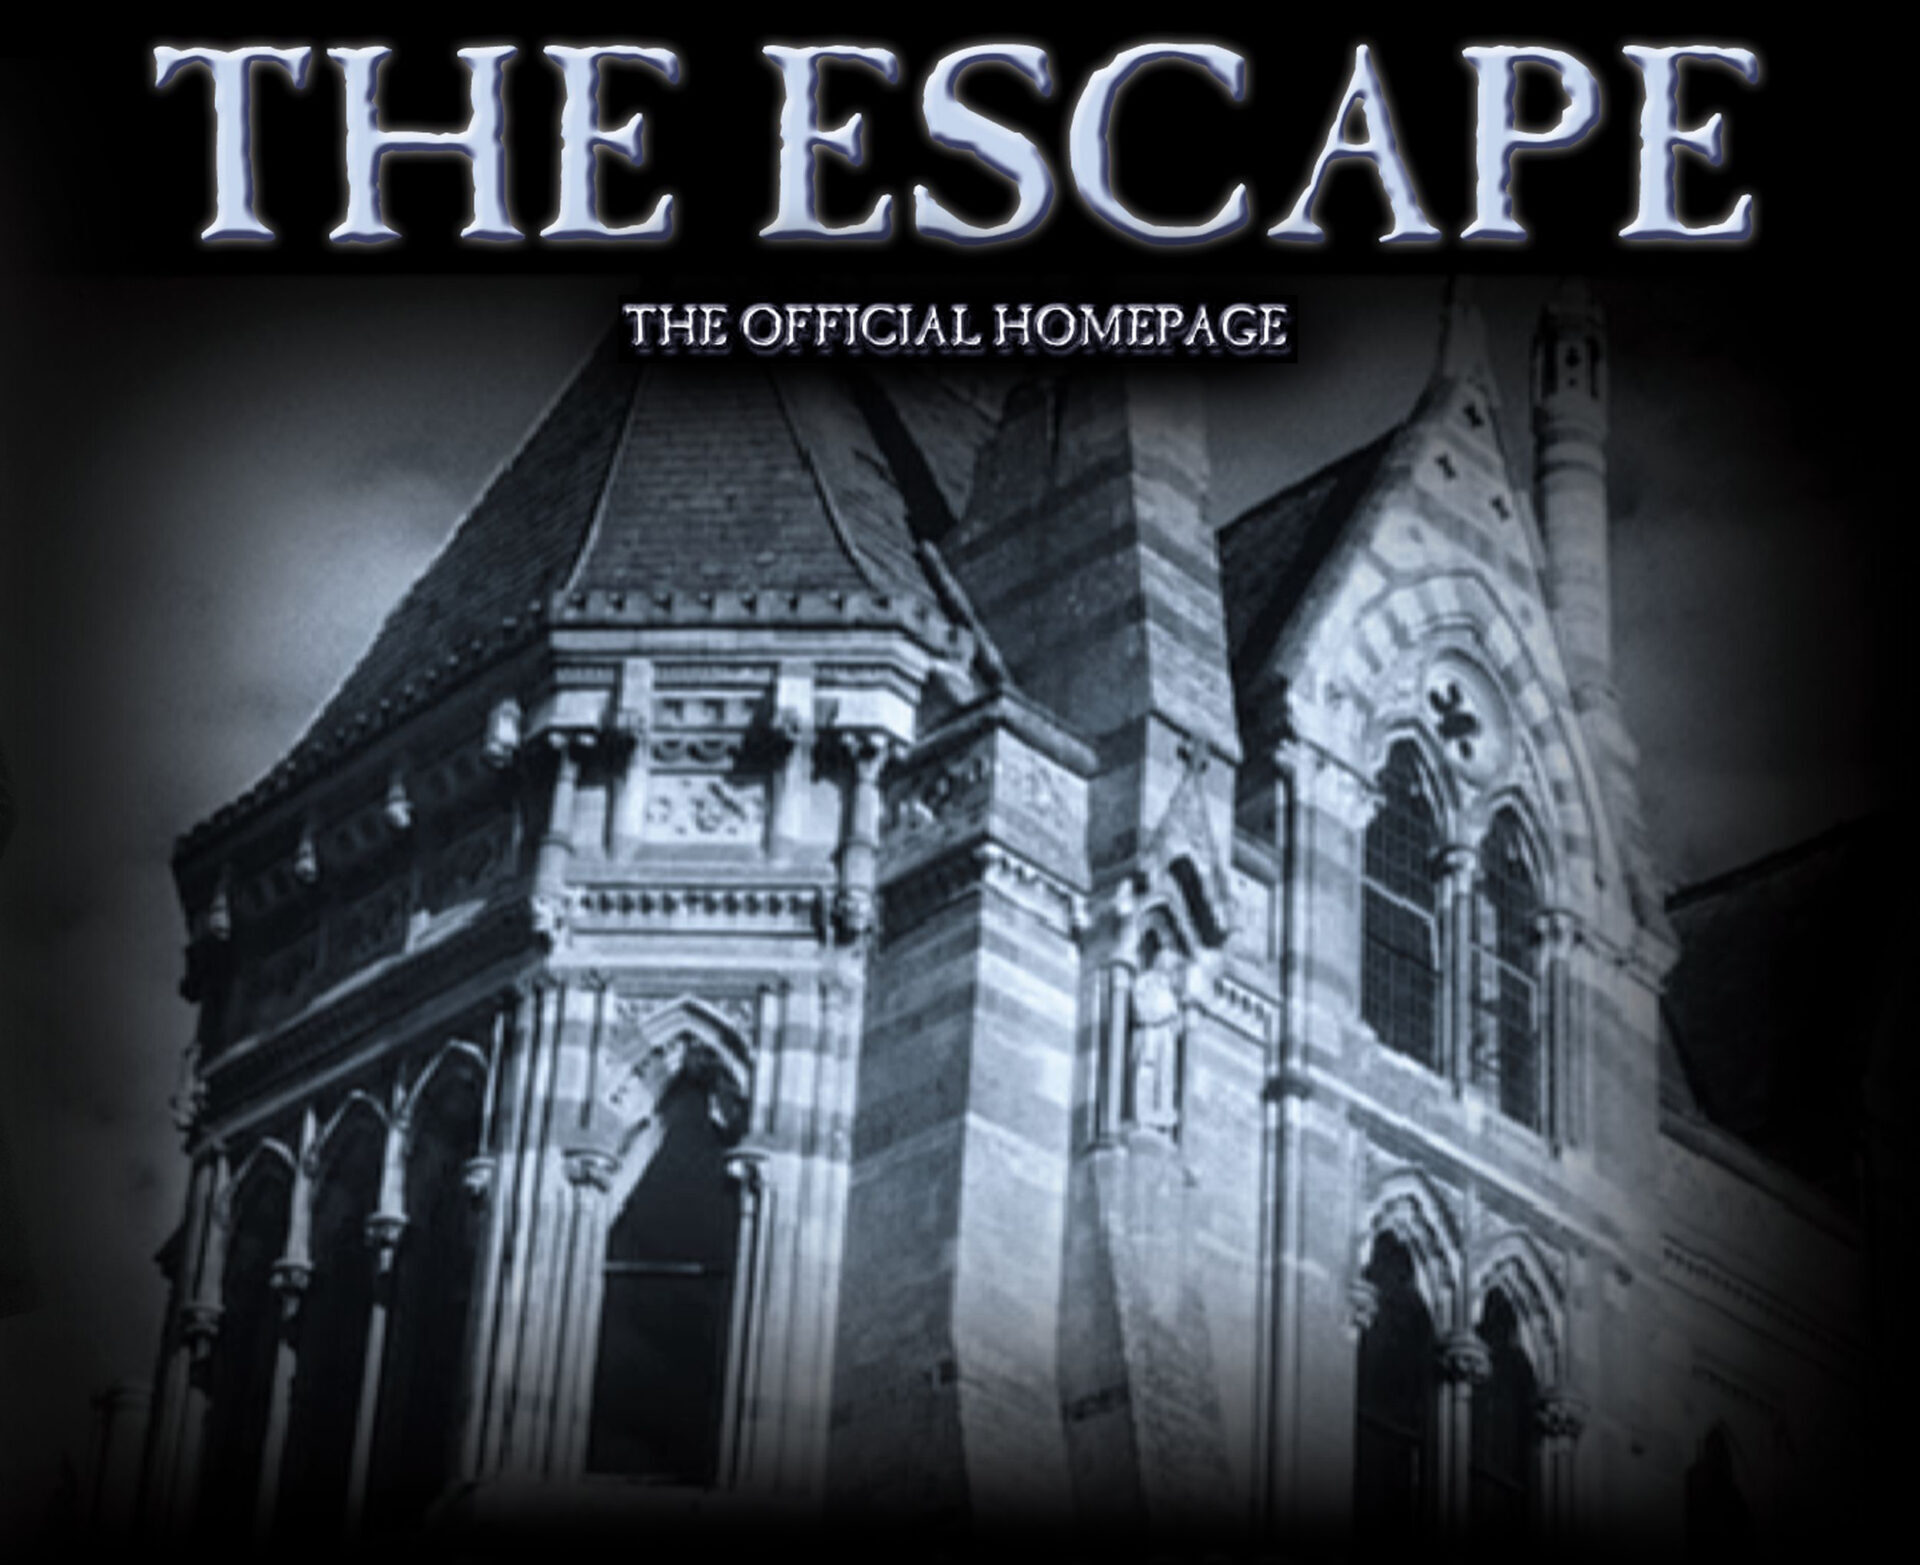 THE ESCAPE - THE OFFICIAL HOMEPAGE